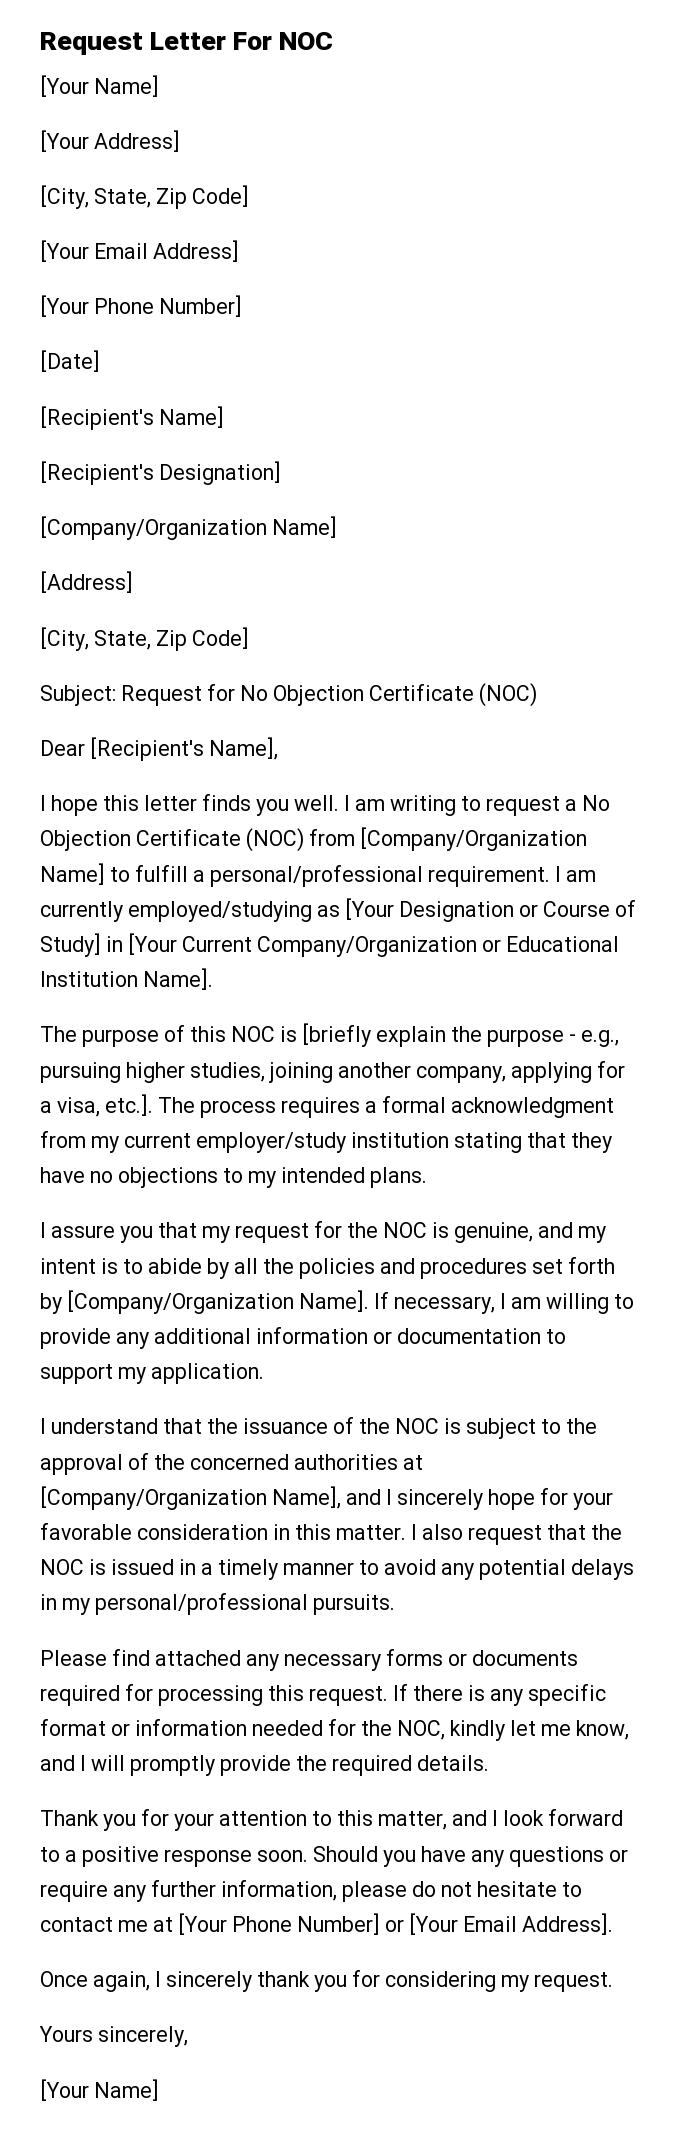 Request Letter For NOC